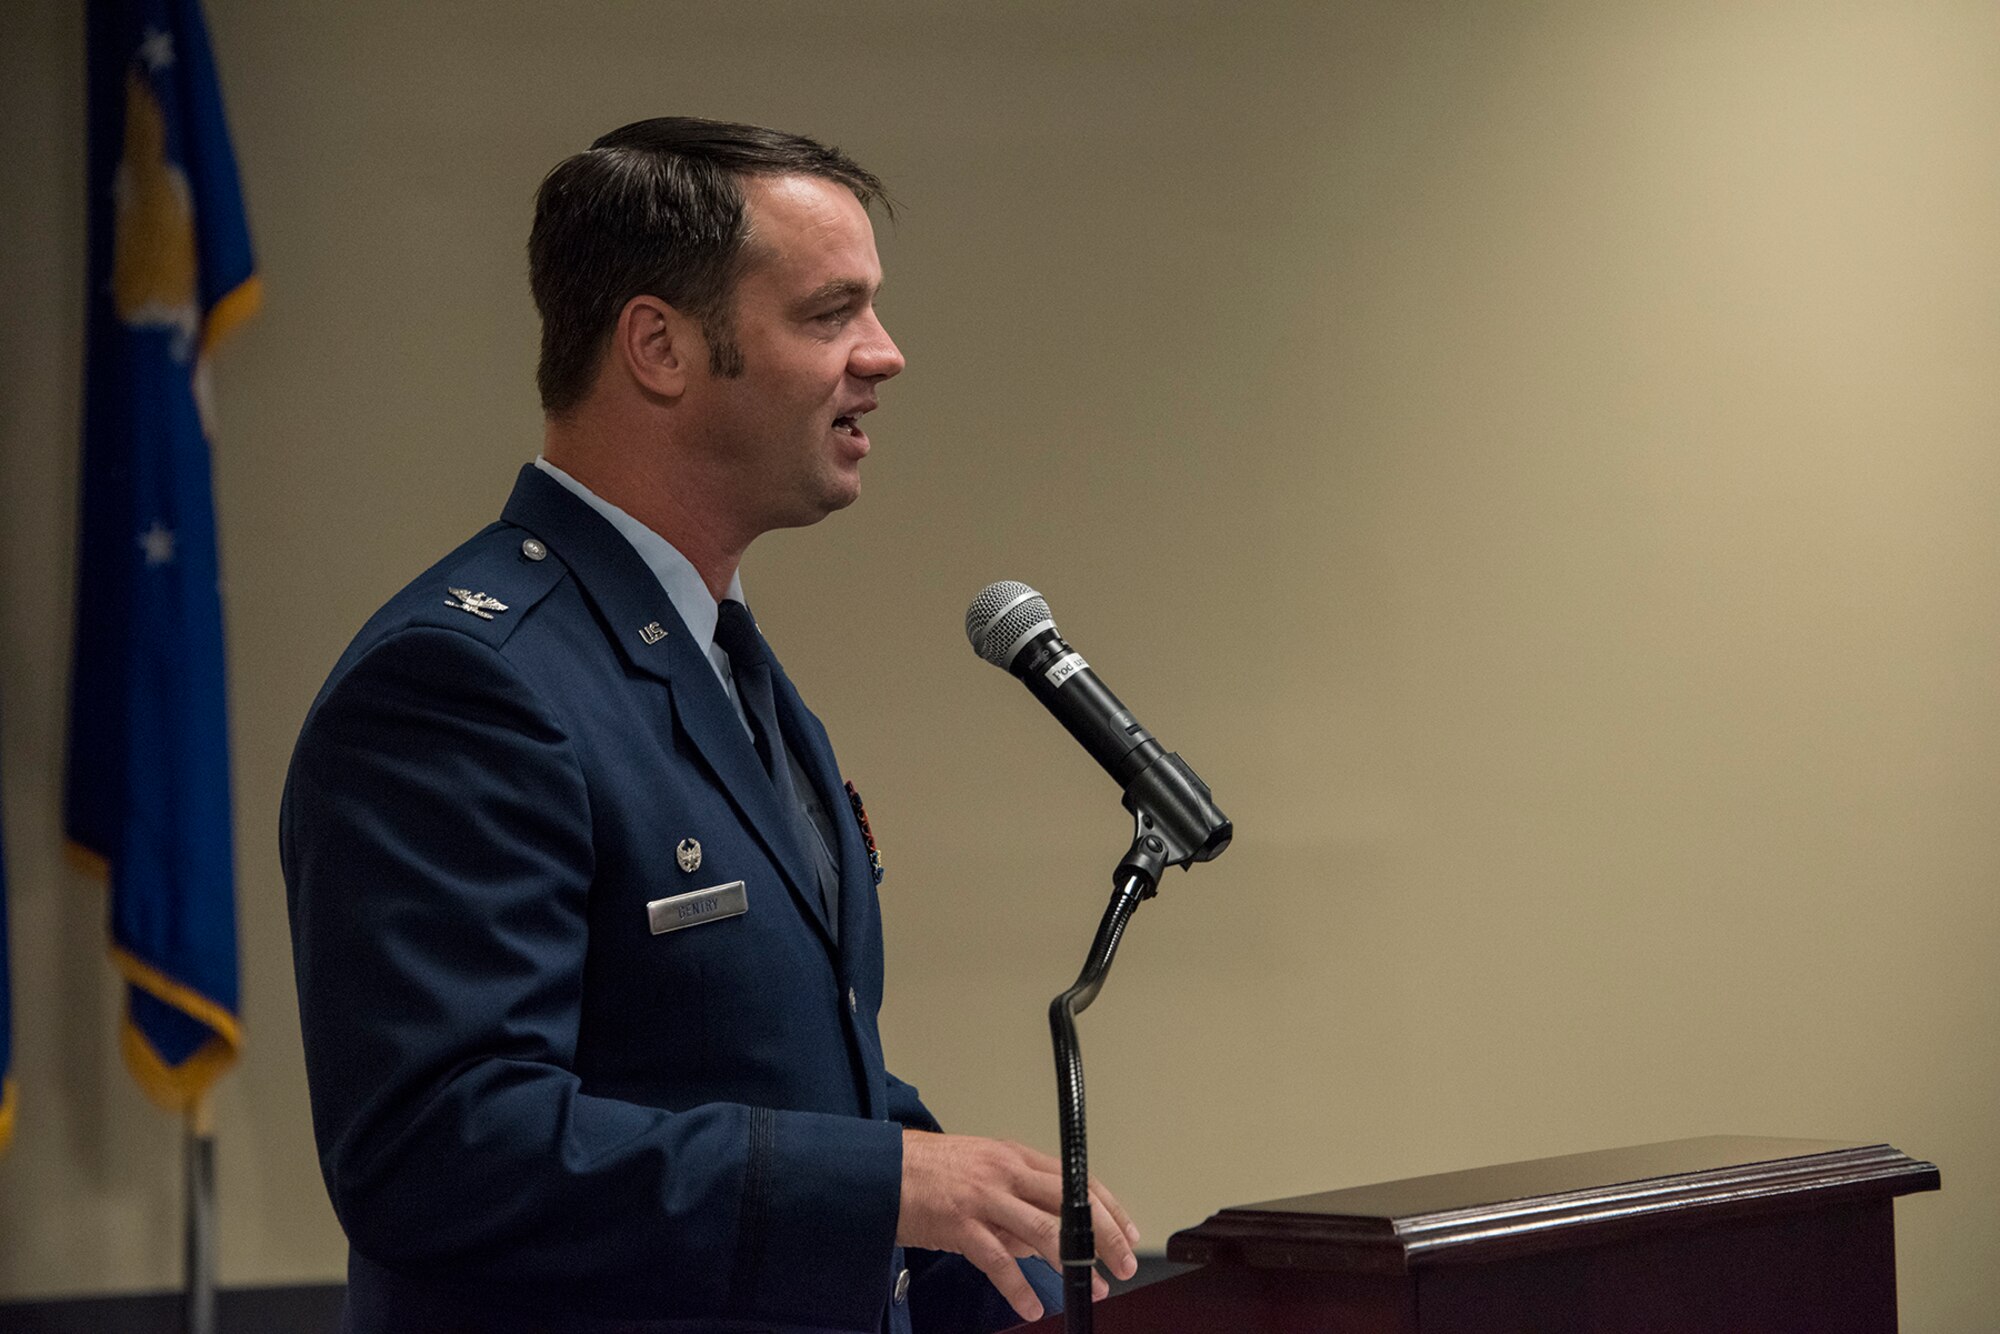 Col. Jeremiah S. Gentry, outgoing 188th Operations Group commander, delivers remarks during a change of command ceremony August 7, 2019, at Ebbing Air National Guard Base, Ft. Smith, Arkansas. Col. Patric D. Coggin assumed command of the 188th Operations Group from Gentry, who will be promoted to the position of wing vice commander during the wing’s August 2019 unit training assembly. (U.S. Air National Guard photo by Tech. Sgt. John E. Hillier)